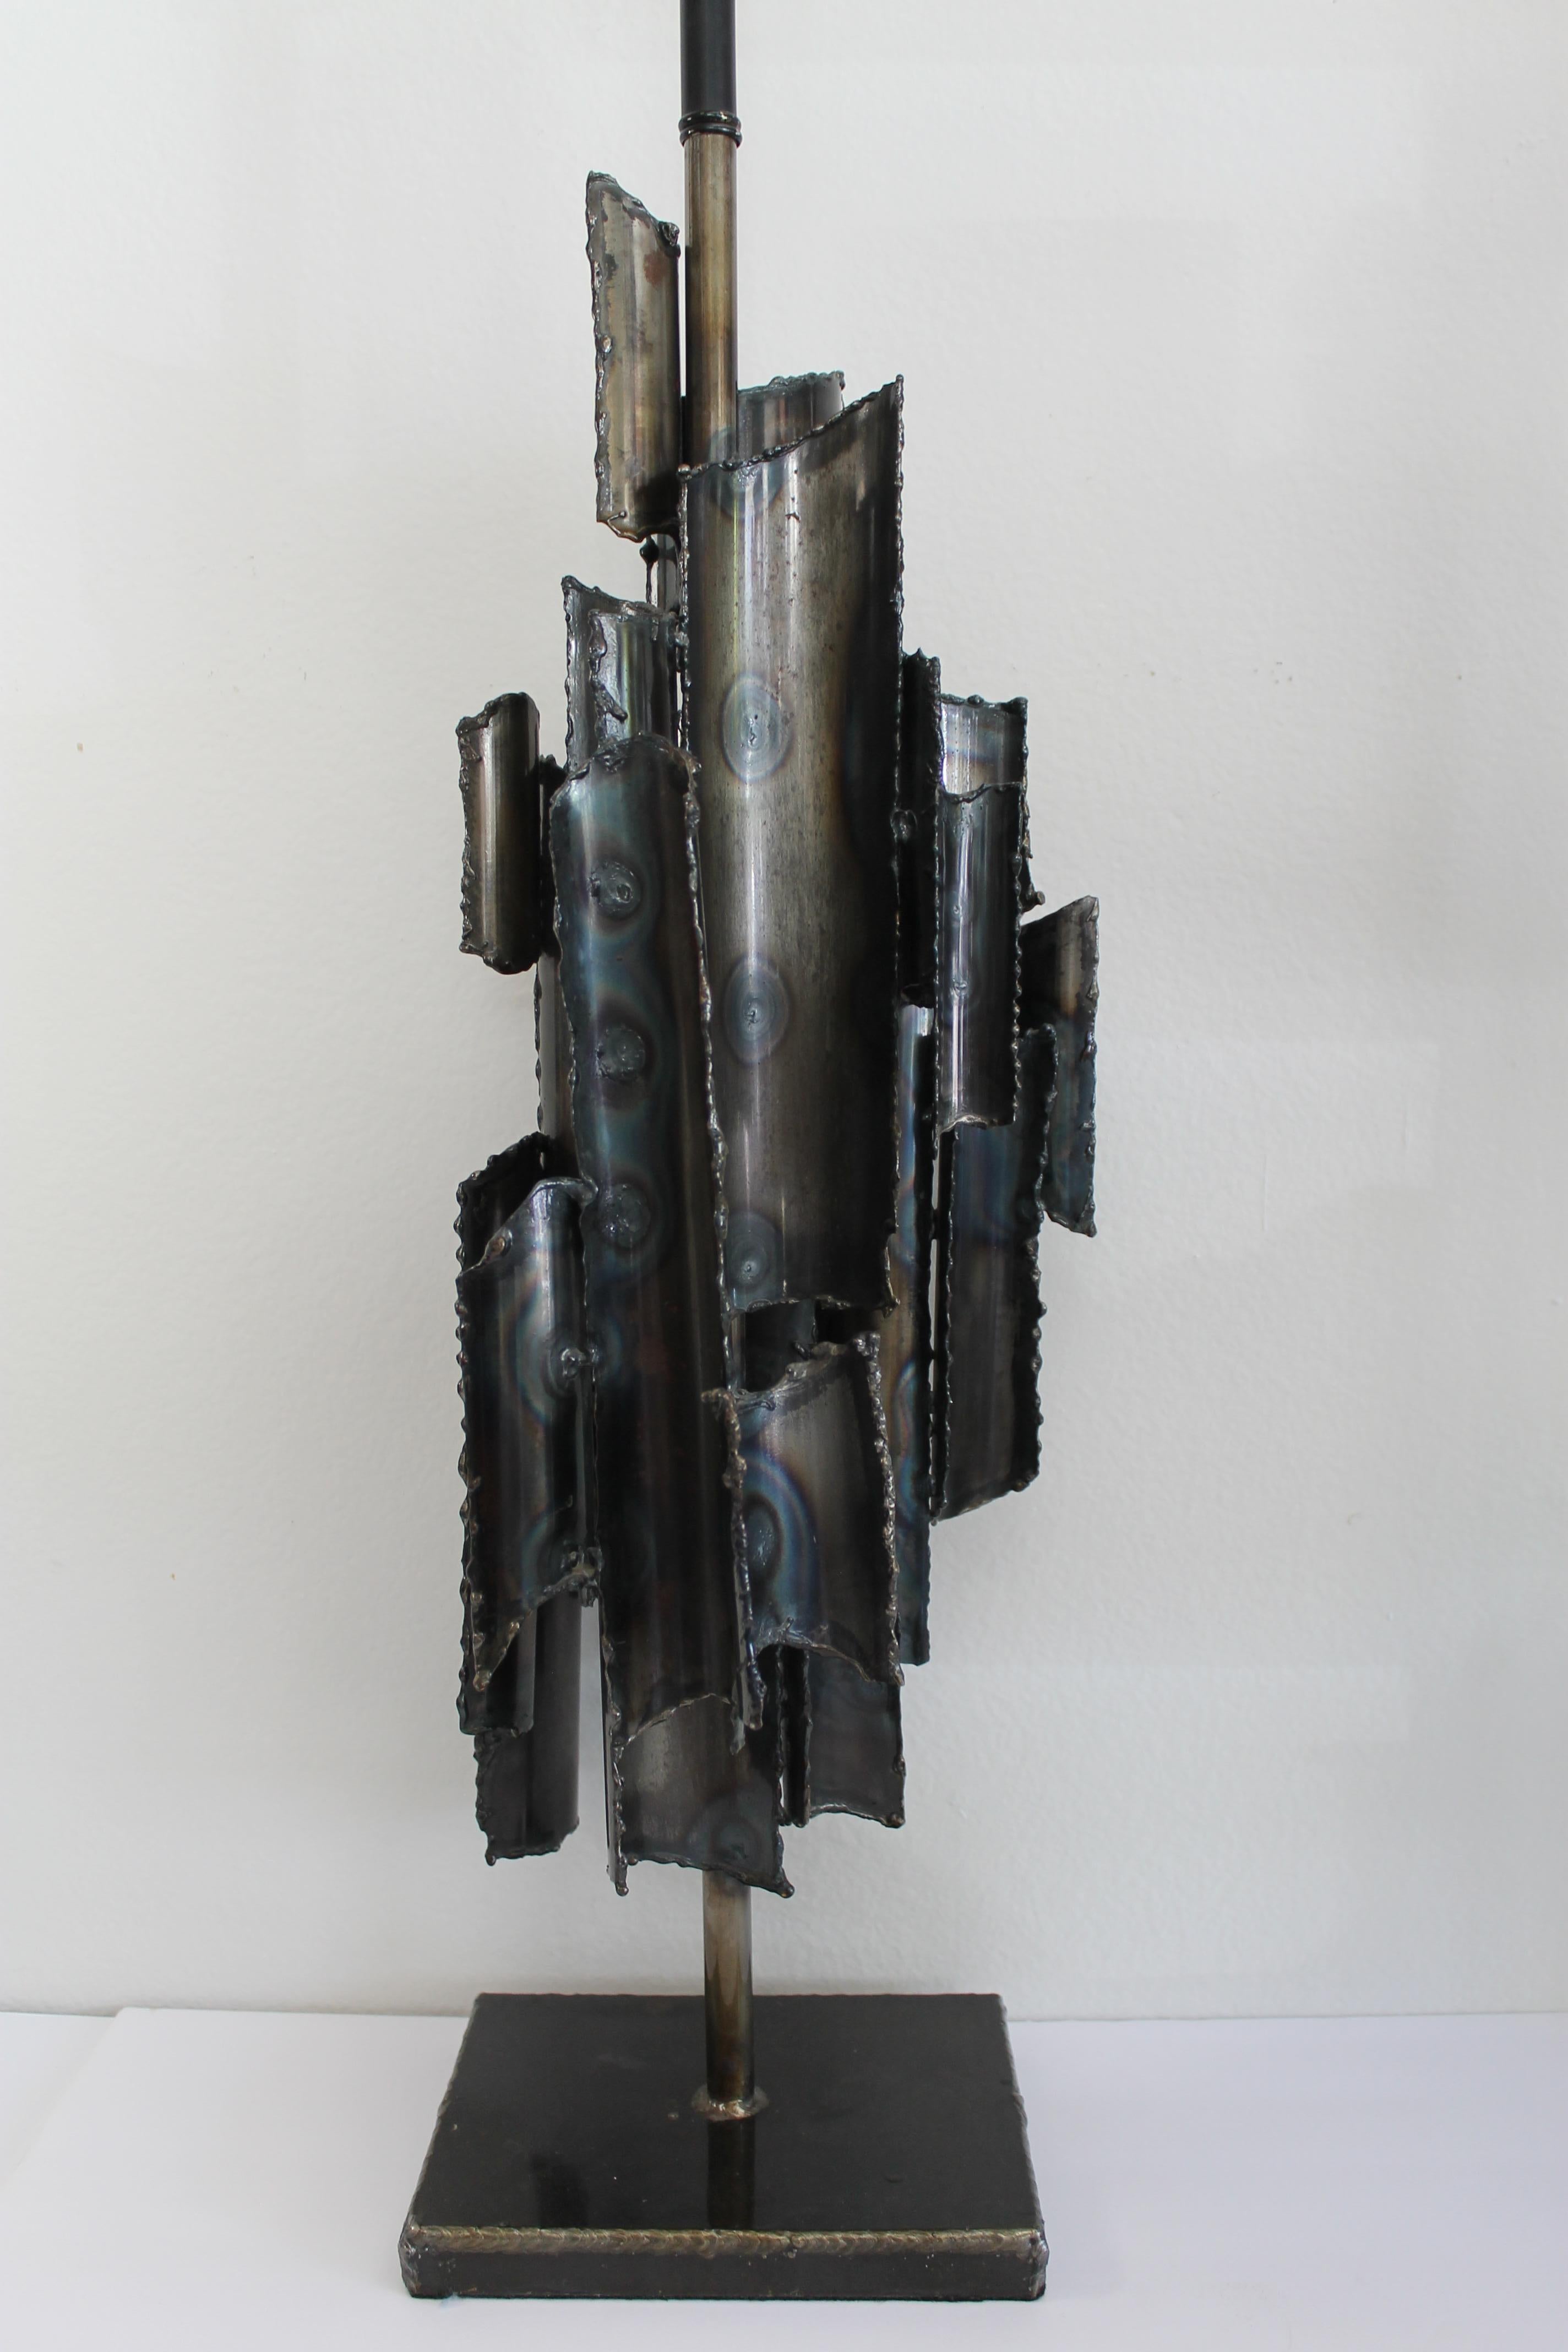 Torch cut brutalist lamp by Marcello Fantoni. Marked Marcello Fantoni, Italy. Lamp measures 10.5